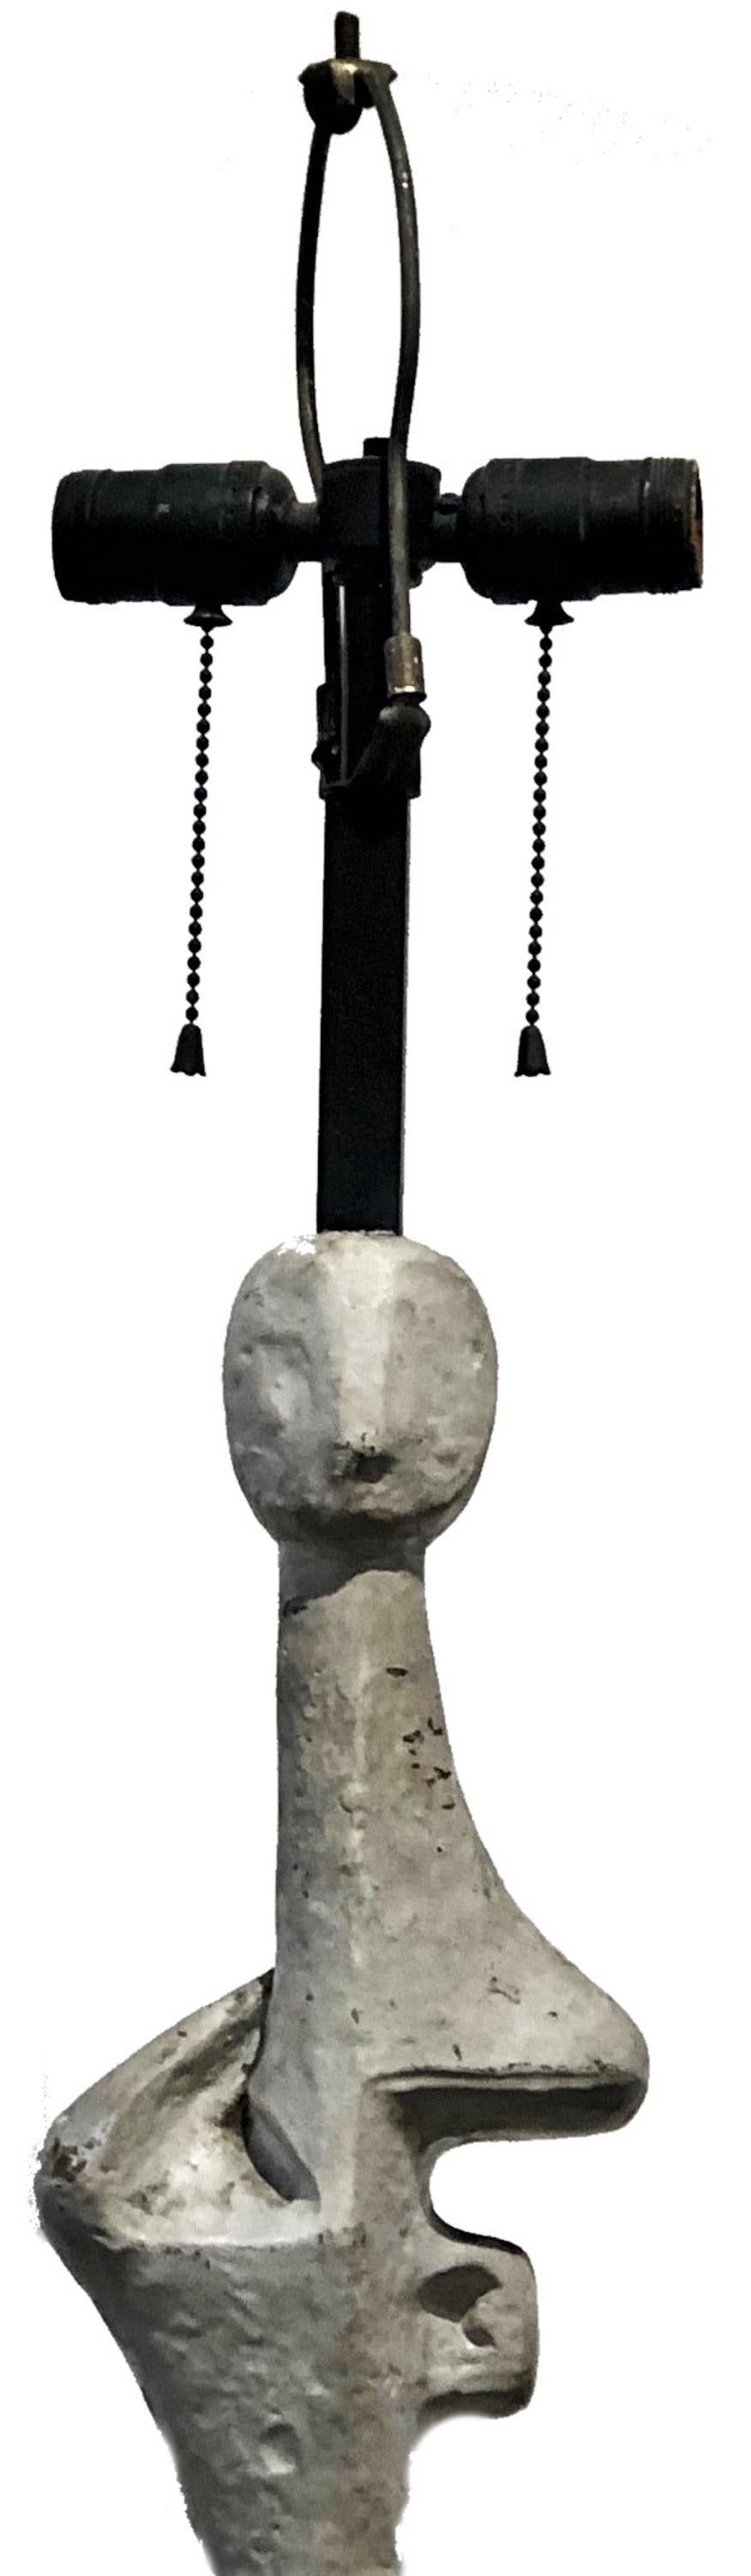 Modernism 
Floor Lamp 
In Manner of Alberto Giacometti 
Composition & Metal
Late XX Century

ABOUT
Today, in the era of eclecticism, this outstanding modernist floor lamp in the style of maestro Giacometti is capable of complimenting almost any